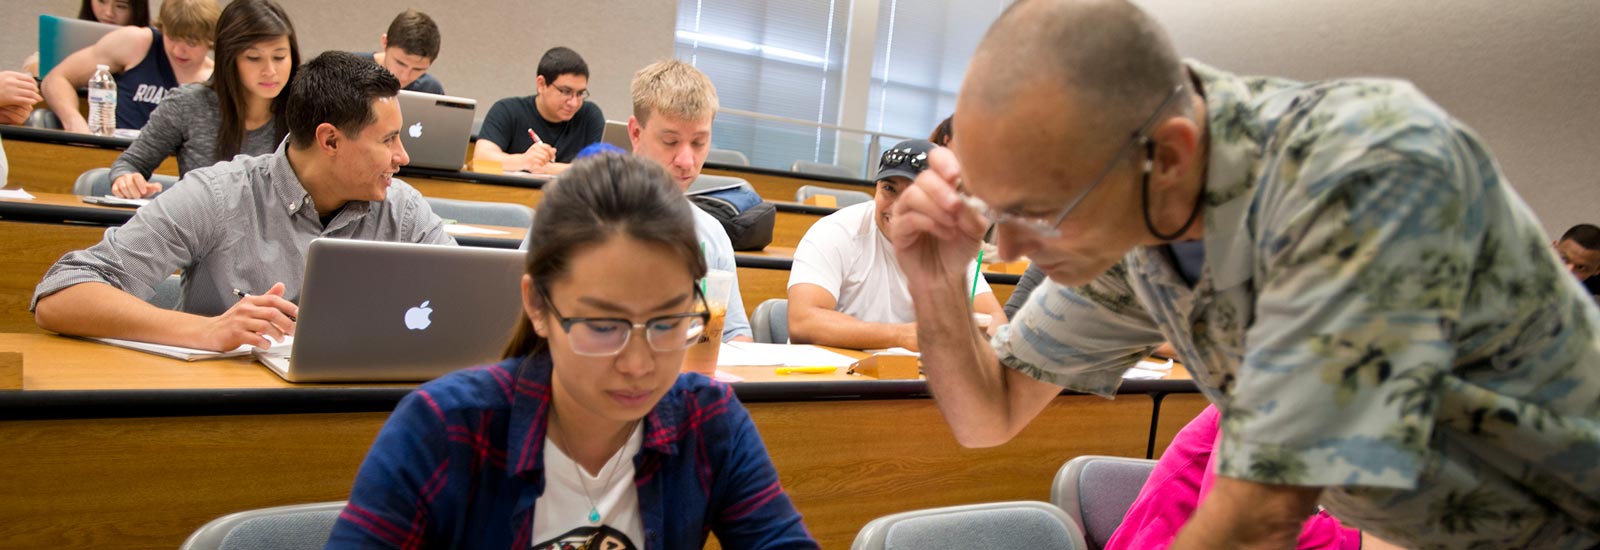 UTSA Faculty in the classroom with students